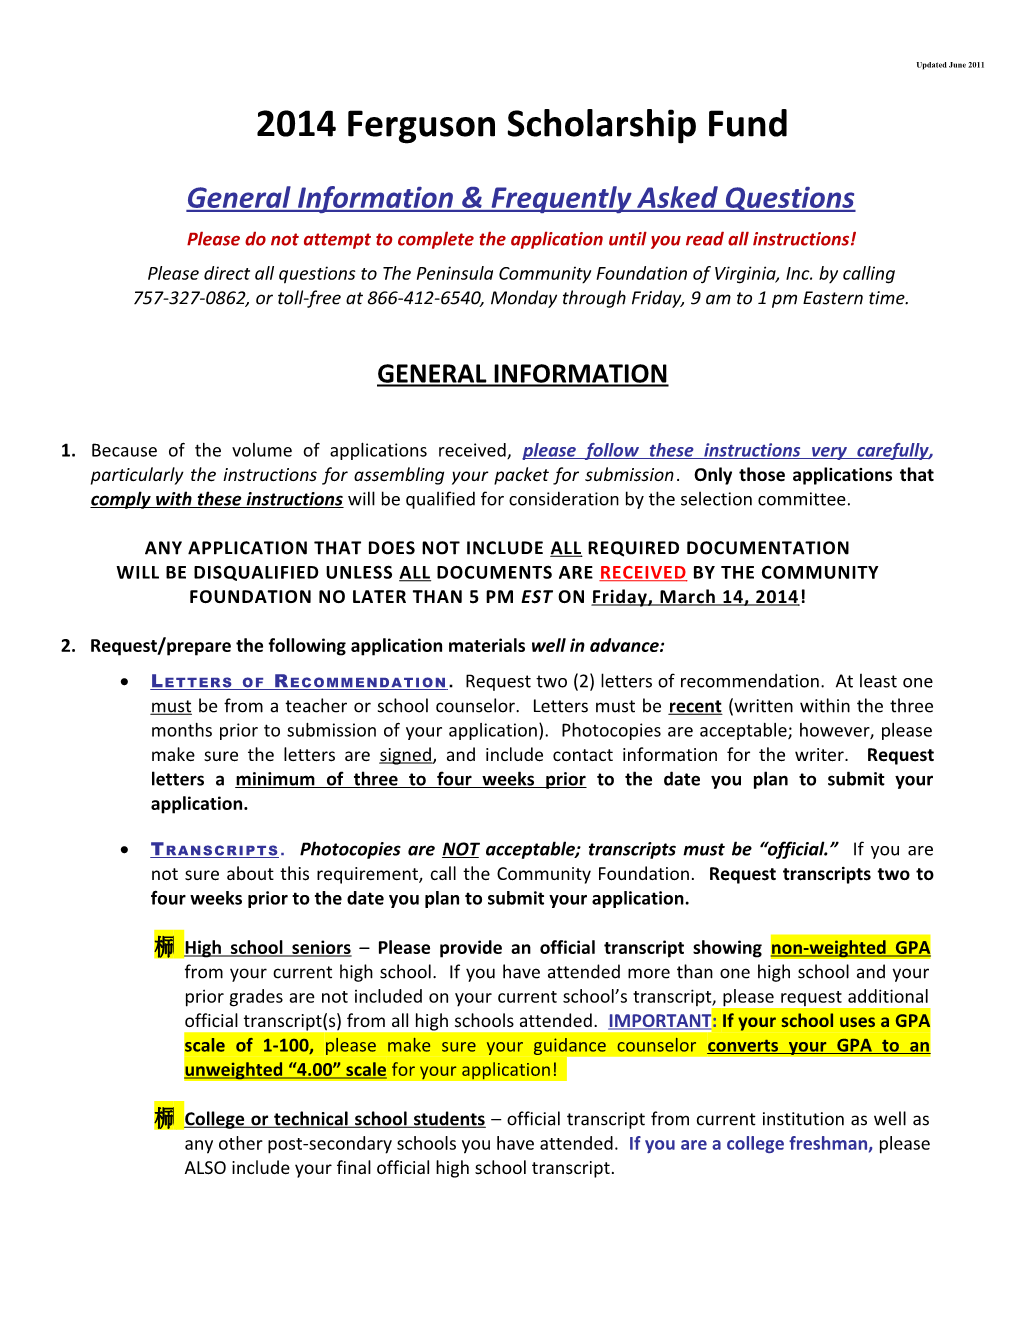 General Information & Frequently Asked Questions